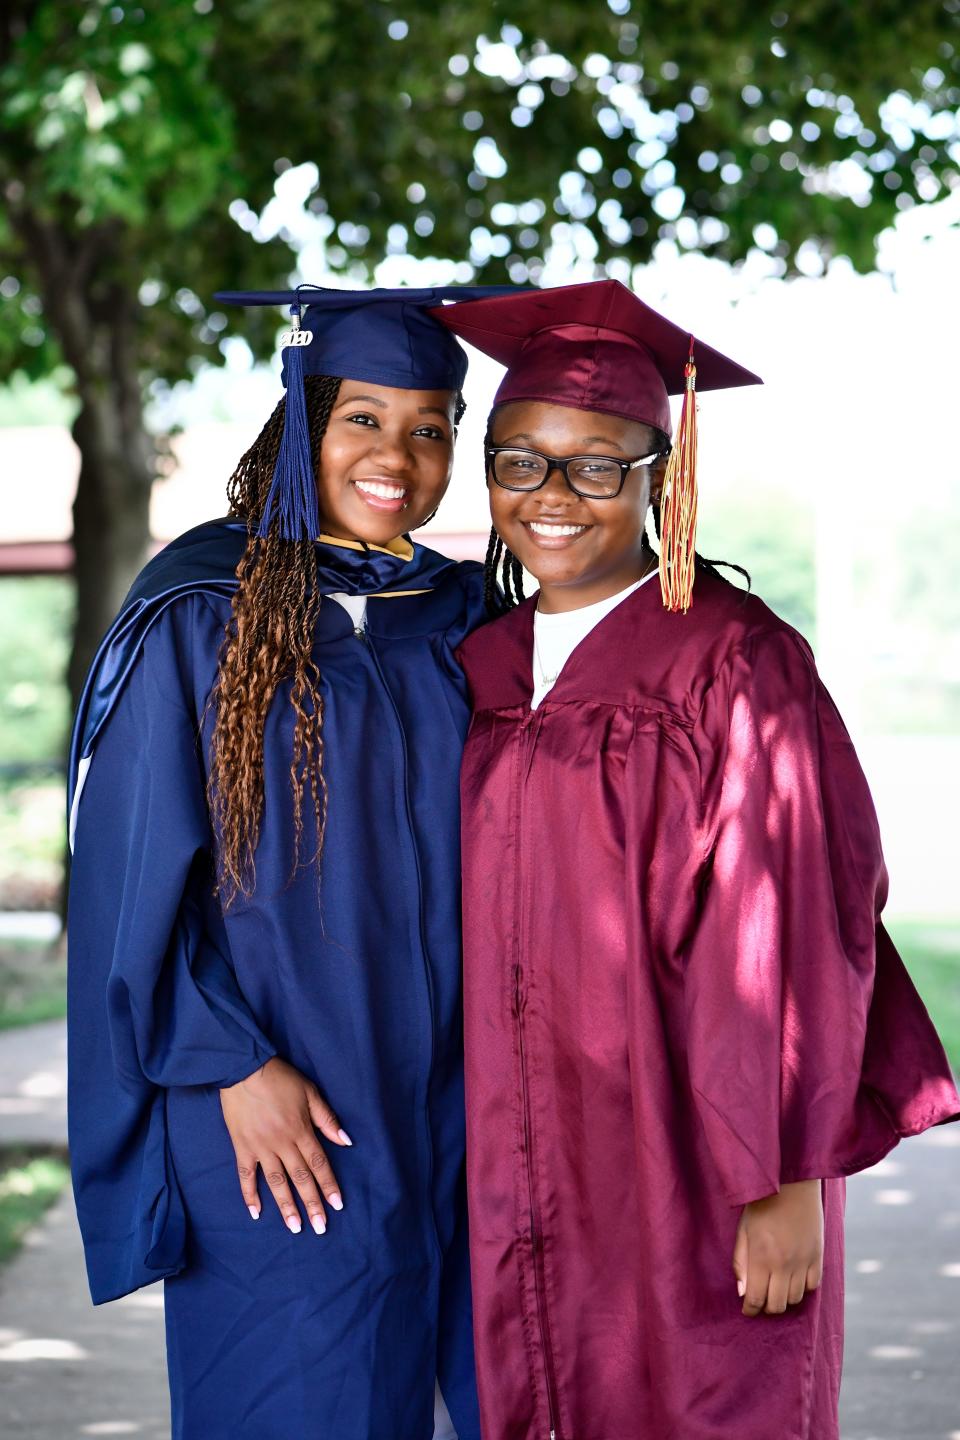 Quiana Cohn, 38, graduated with her master's degree at the same time her daughter, India, 18, graduated from high school. (Gaby Valladolid)